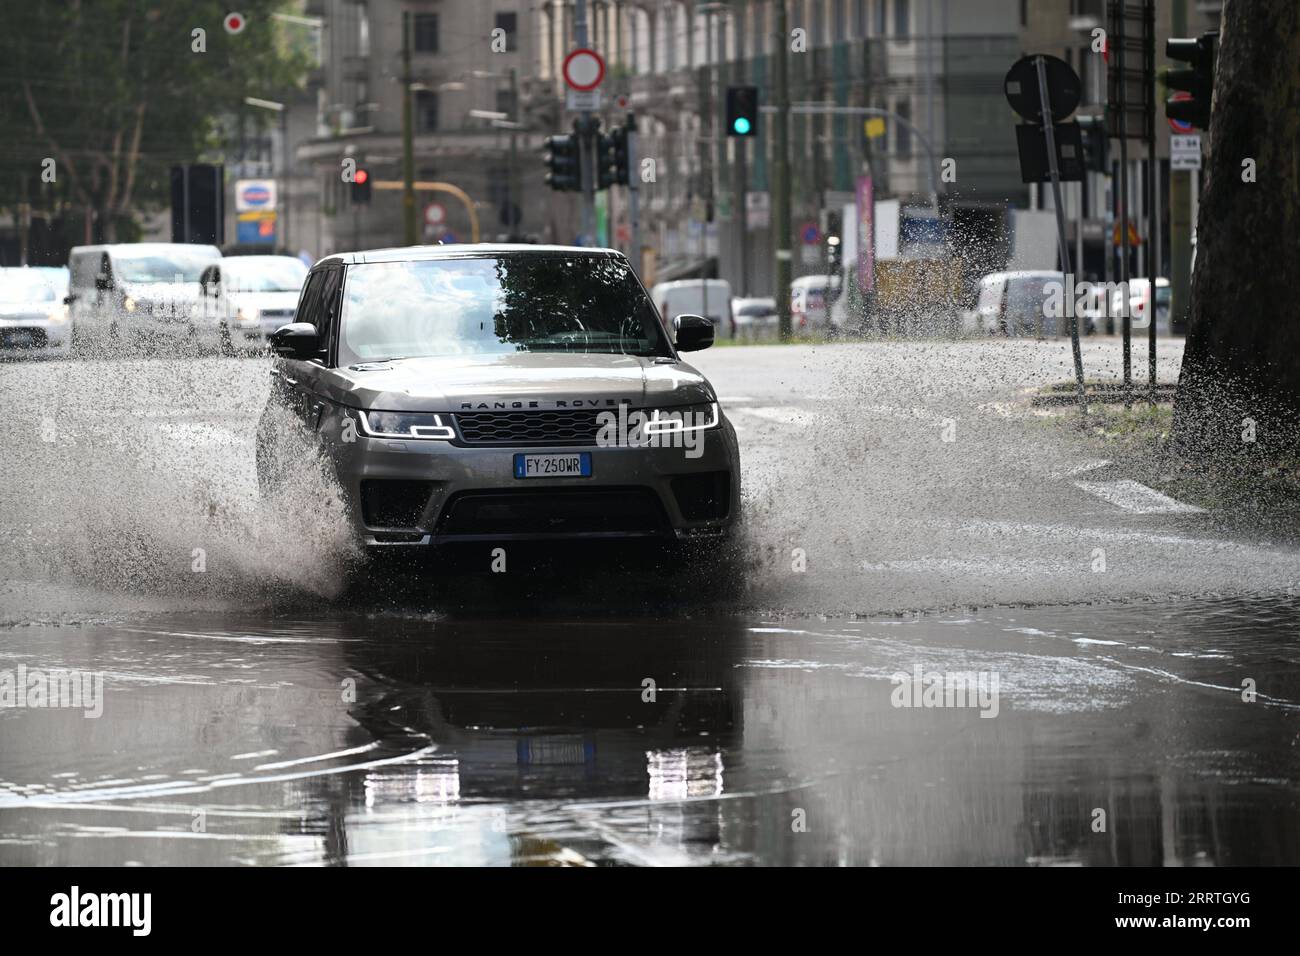 230725 -- MILAN ITALY, July 25, 2023 -- A vehicle drives through a flooded street after thunderstorms in Milan, Italy, on July 25, 2023. While the southern two-thirds of Italy struggled under the oppressive heat, most of the northern area was pelted by thunderstorms and over-sized hail. Media reports said the emergency services in Milan had responded to more than 200 requests for help related to flooding, fallen trees, and damage to cars and homes, since a severe storm hit the city late Monday. Str/Xinhua ITALY-MILAN-THUNDERSTORM-HAIL-AFTERMATH Stringer PUBLICATIONxNOTxINxCHN Stock Photo